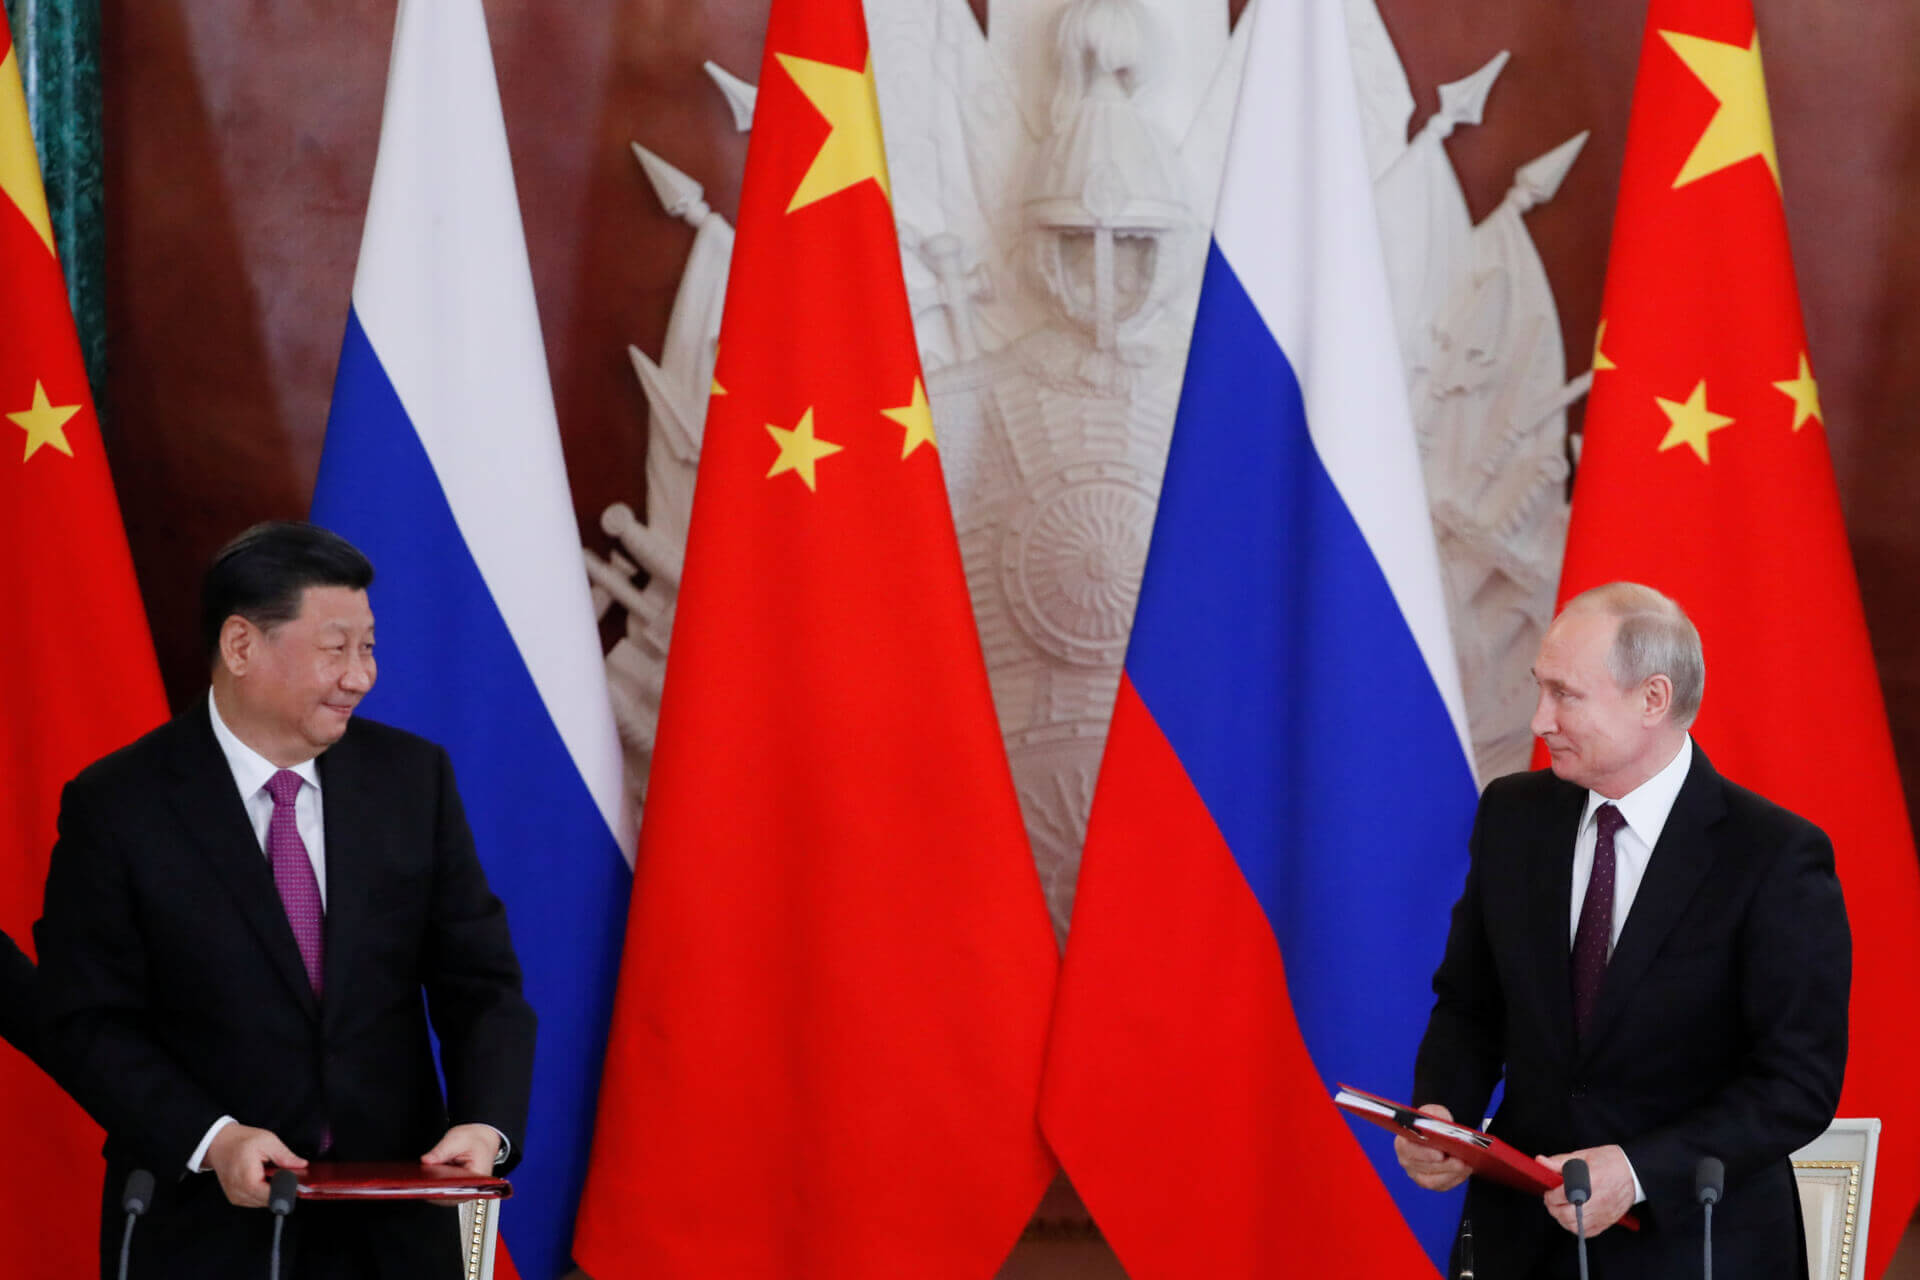 In the Ukraine Conflict, China’s Loyalty Clearly Lies With Russia